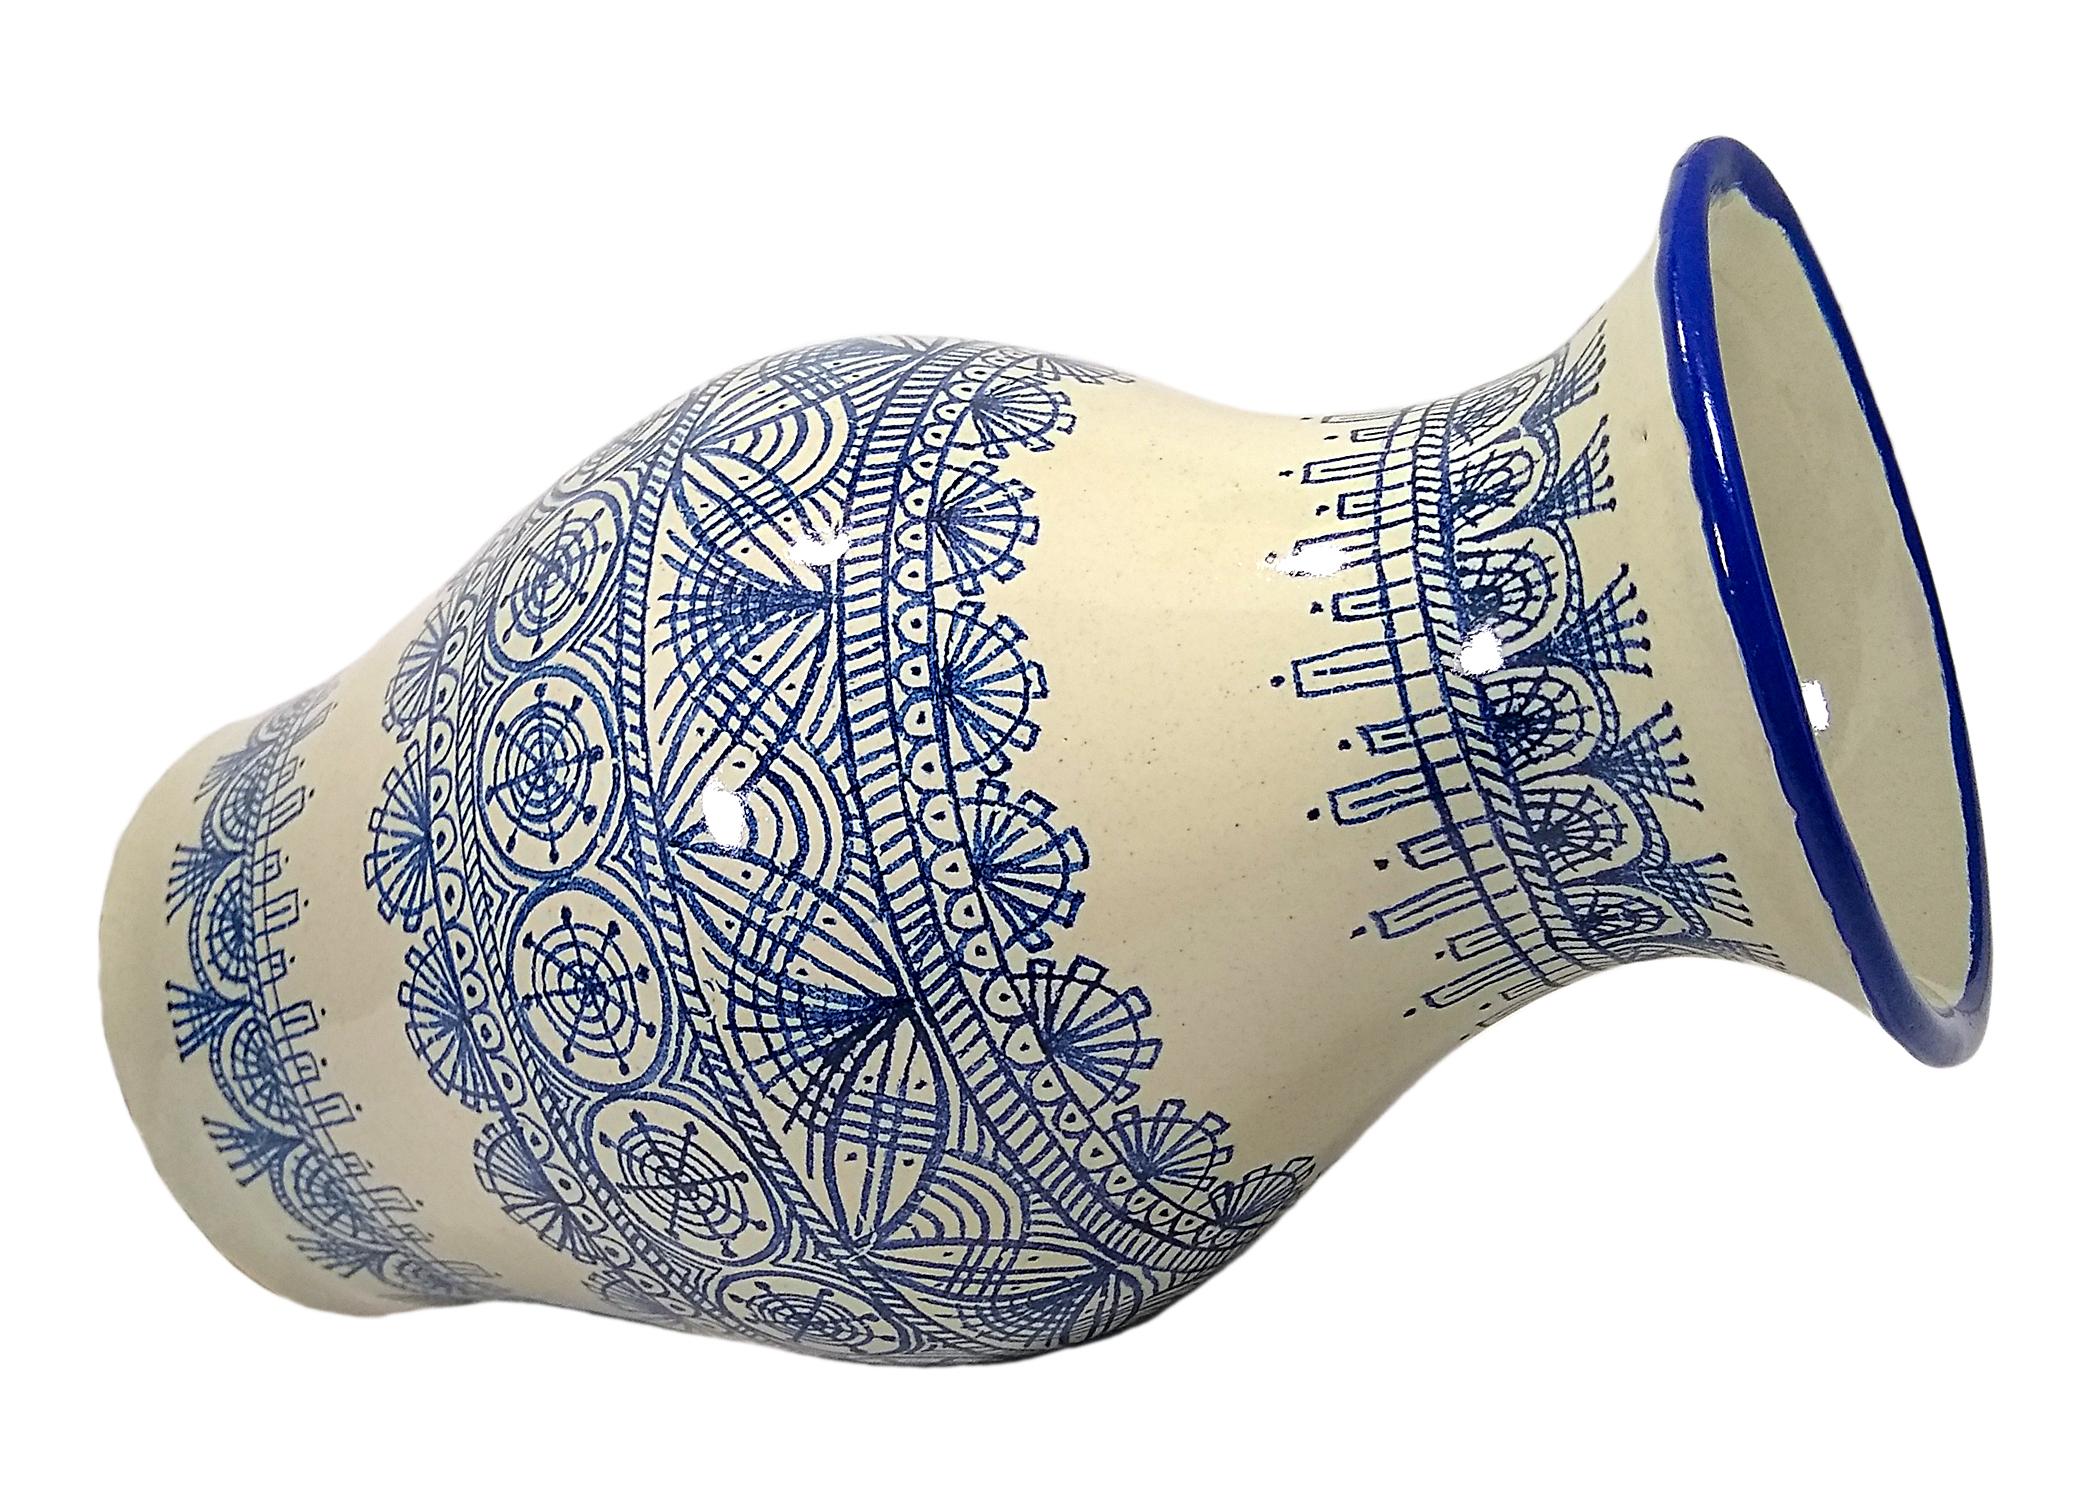 Elegant white and blue vase made with the Talavera technique. Artist, Cesar Torres portraits the colonial art of Mexico. 

The Talavera is not just a simple painted ceramic: its exquisite decoration is the product of a delicate process of alchemy